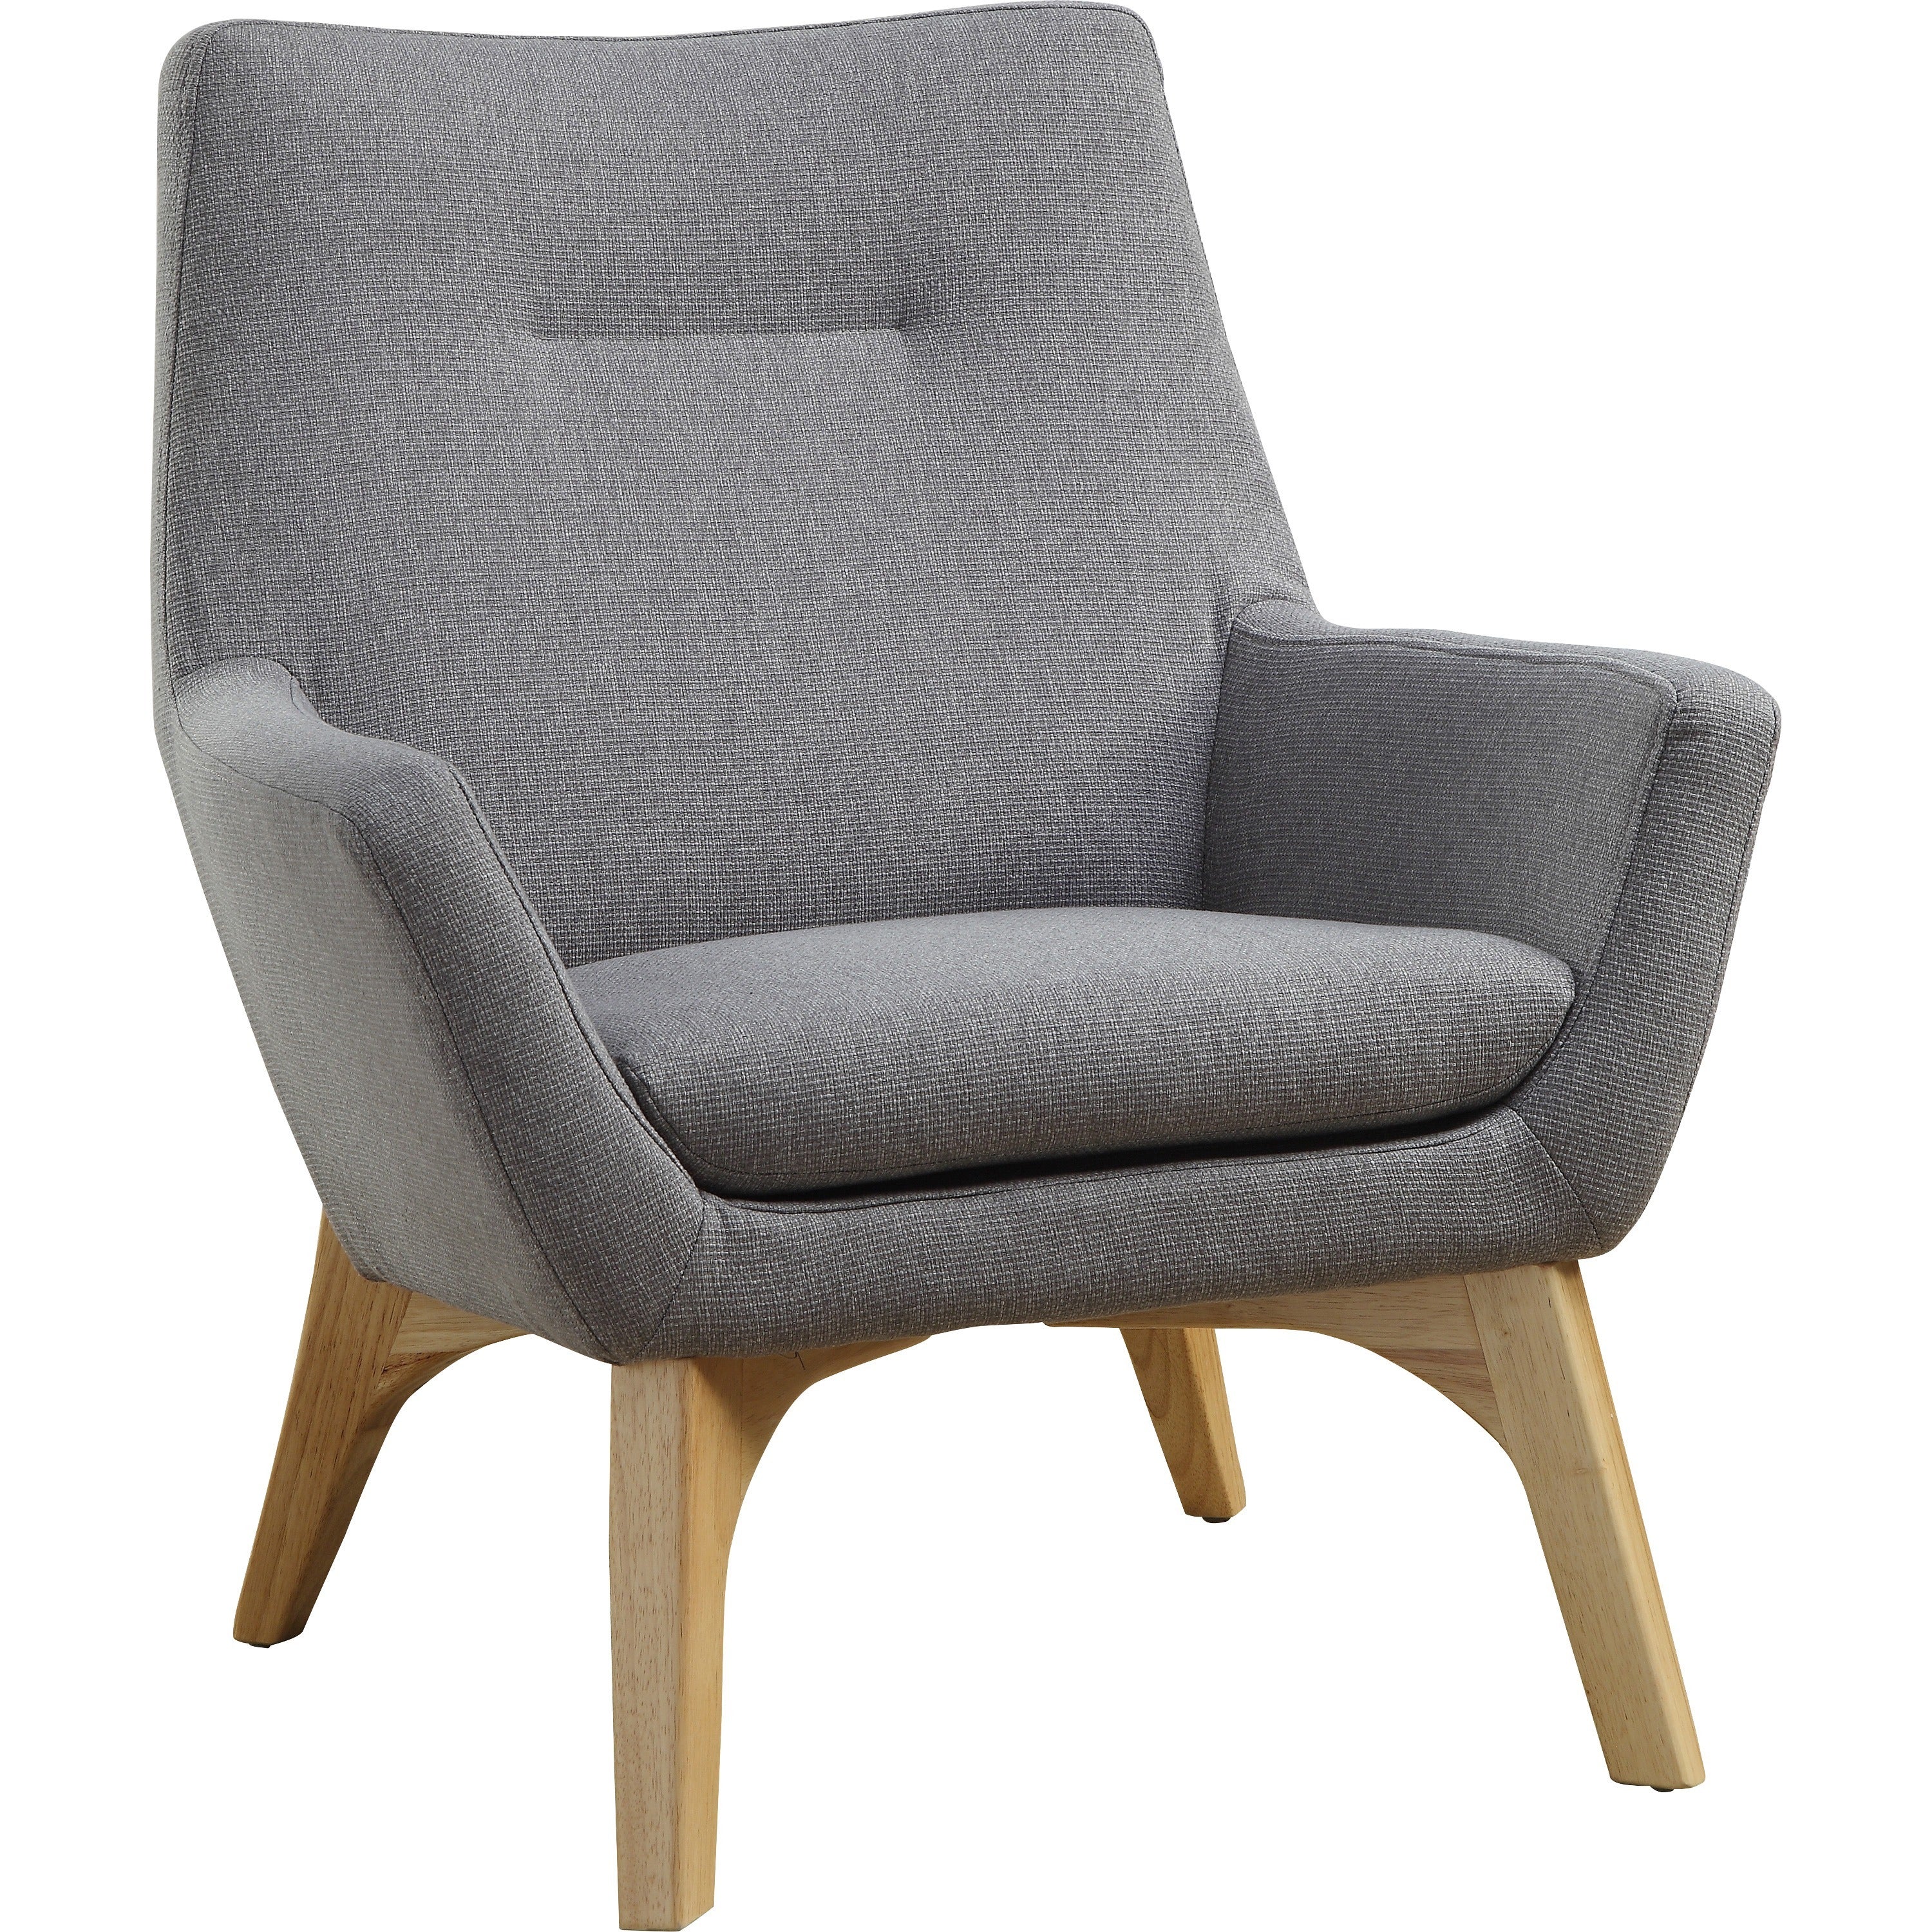 lorell-quintessence-collection-upholstered-chair-gray-seat-gray-back-low-back-four-legged-base-1-each_llr68961 - 1